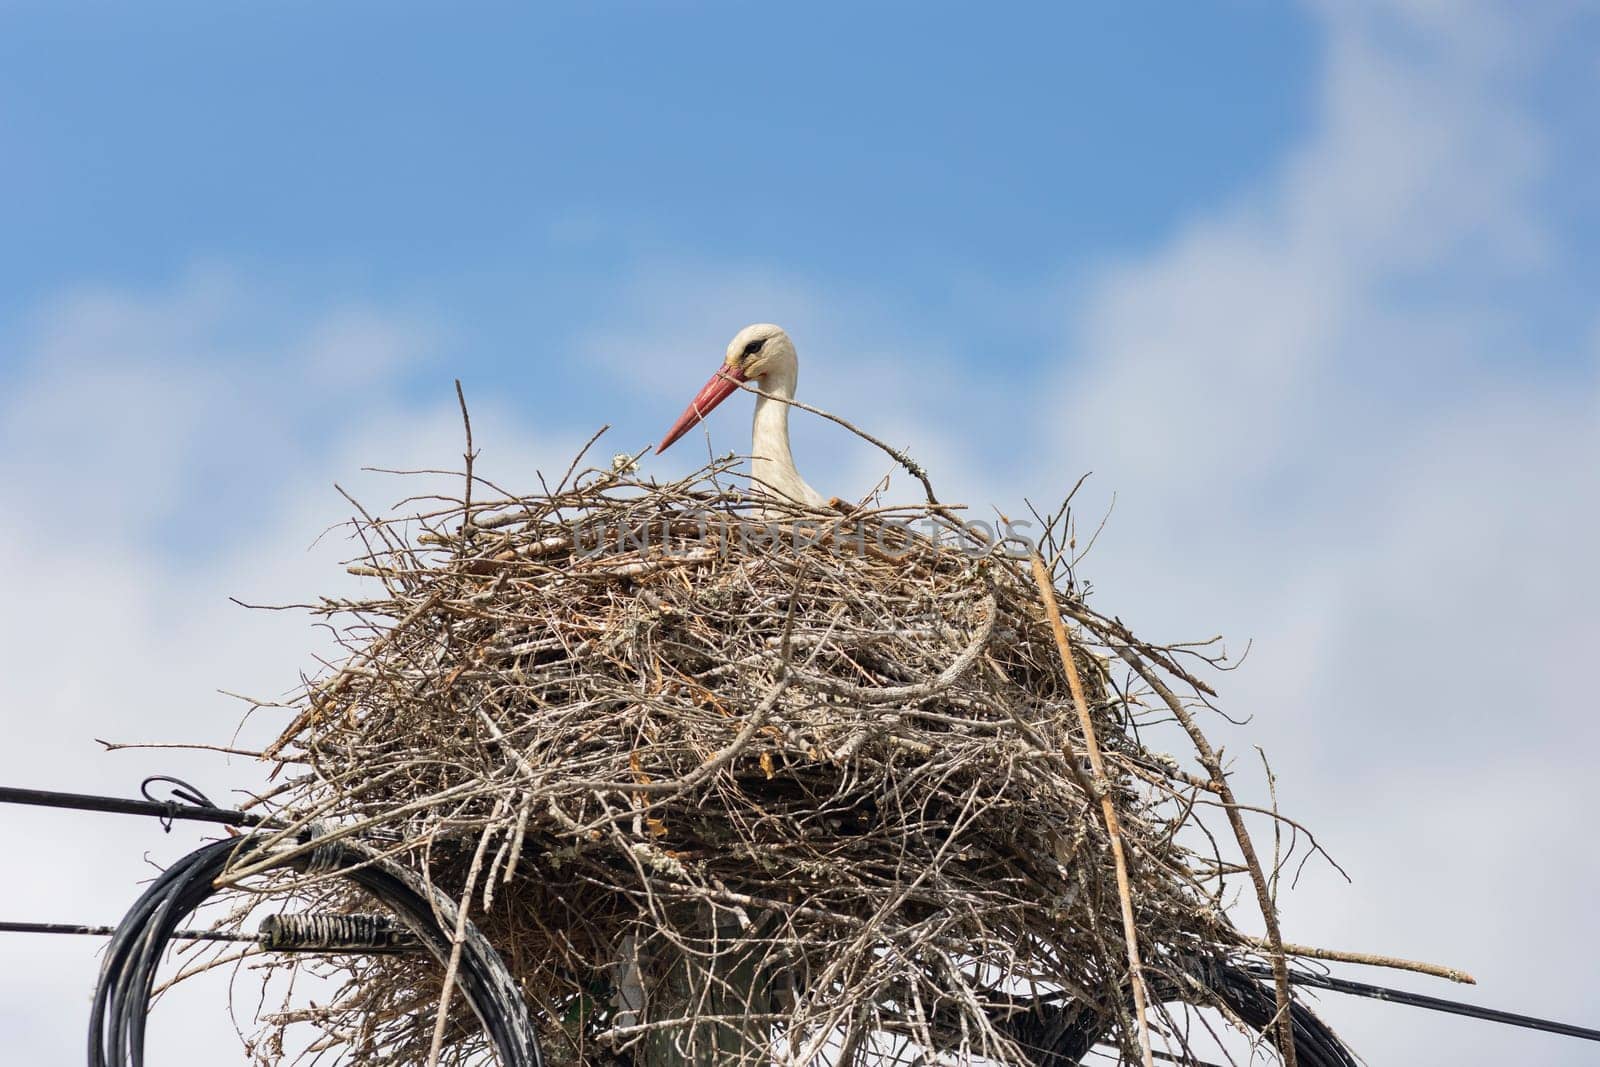 A stork bird is sitting in a nest made of twigs and branches by Studia72